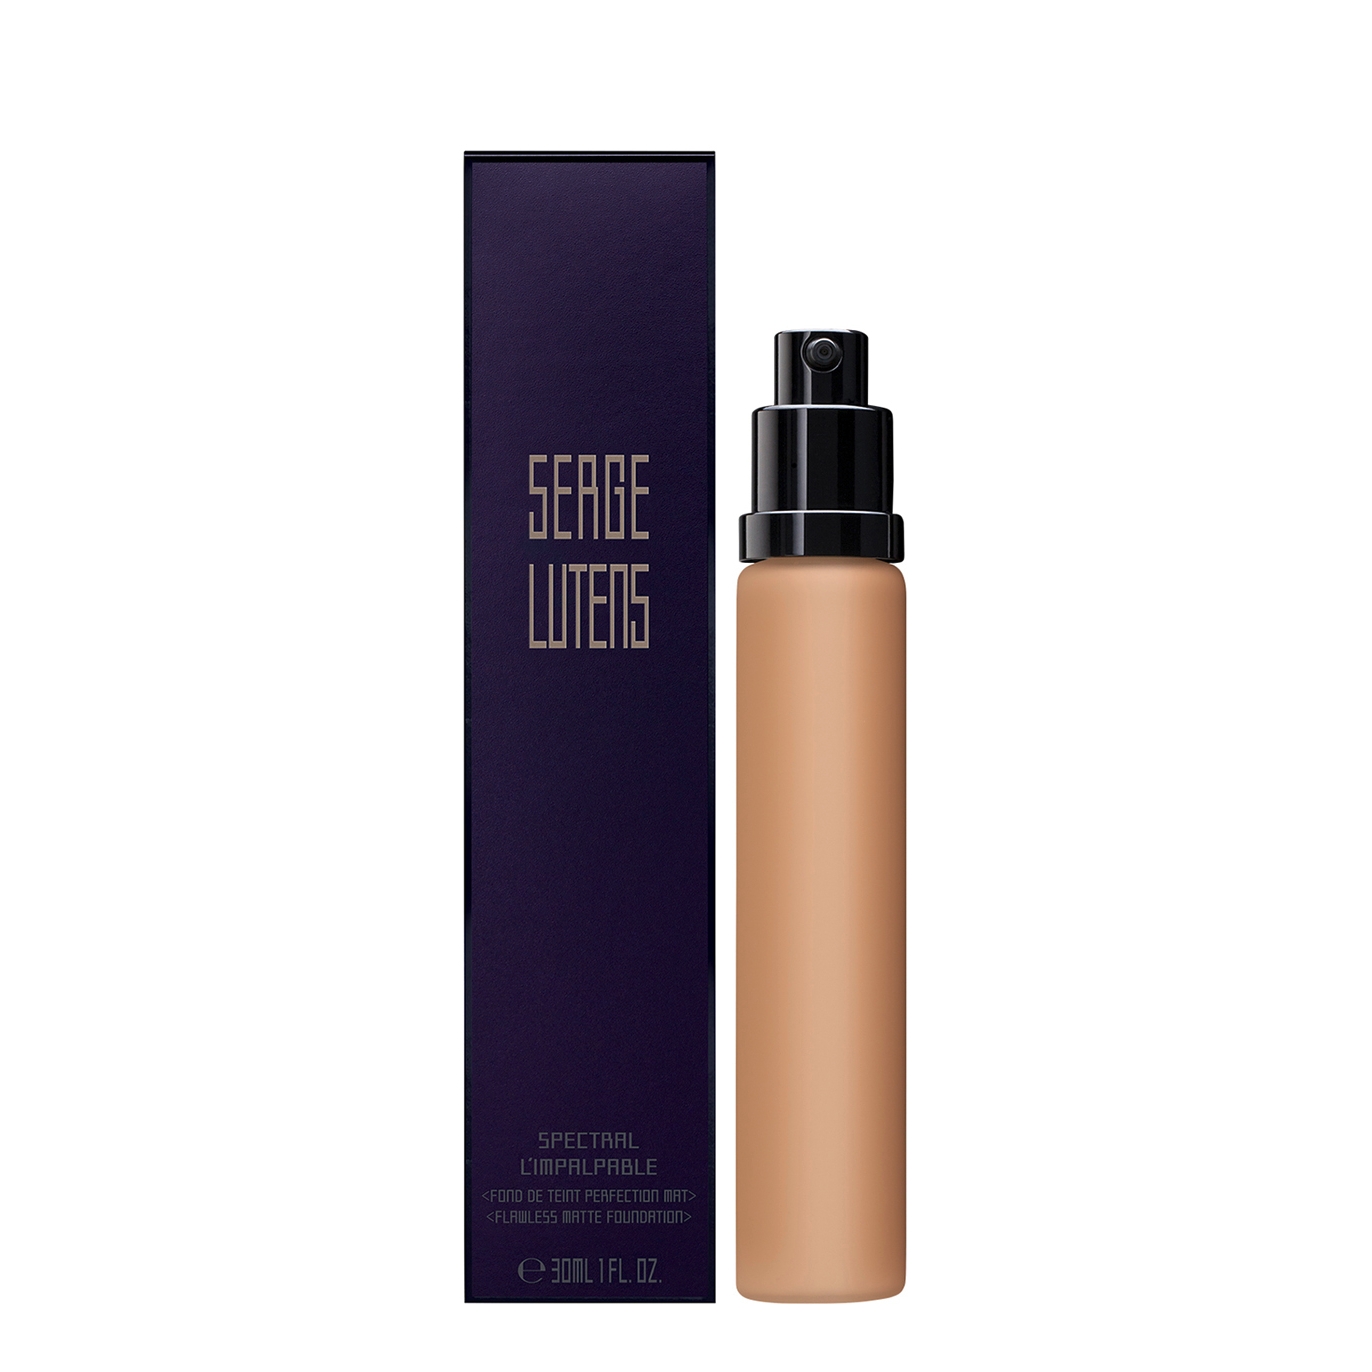 Serge Lutens Spectral Fluid Foundation Refill In I40